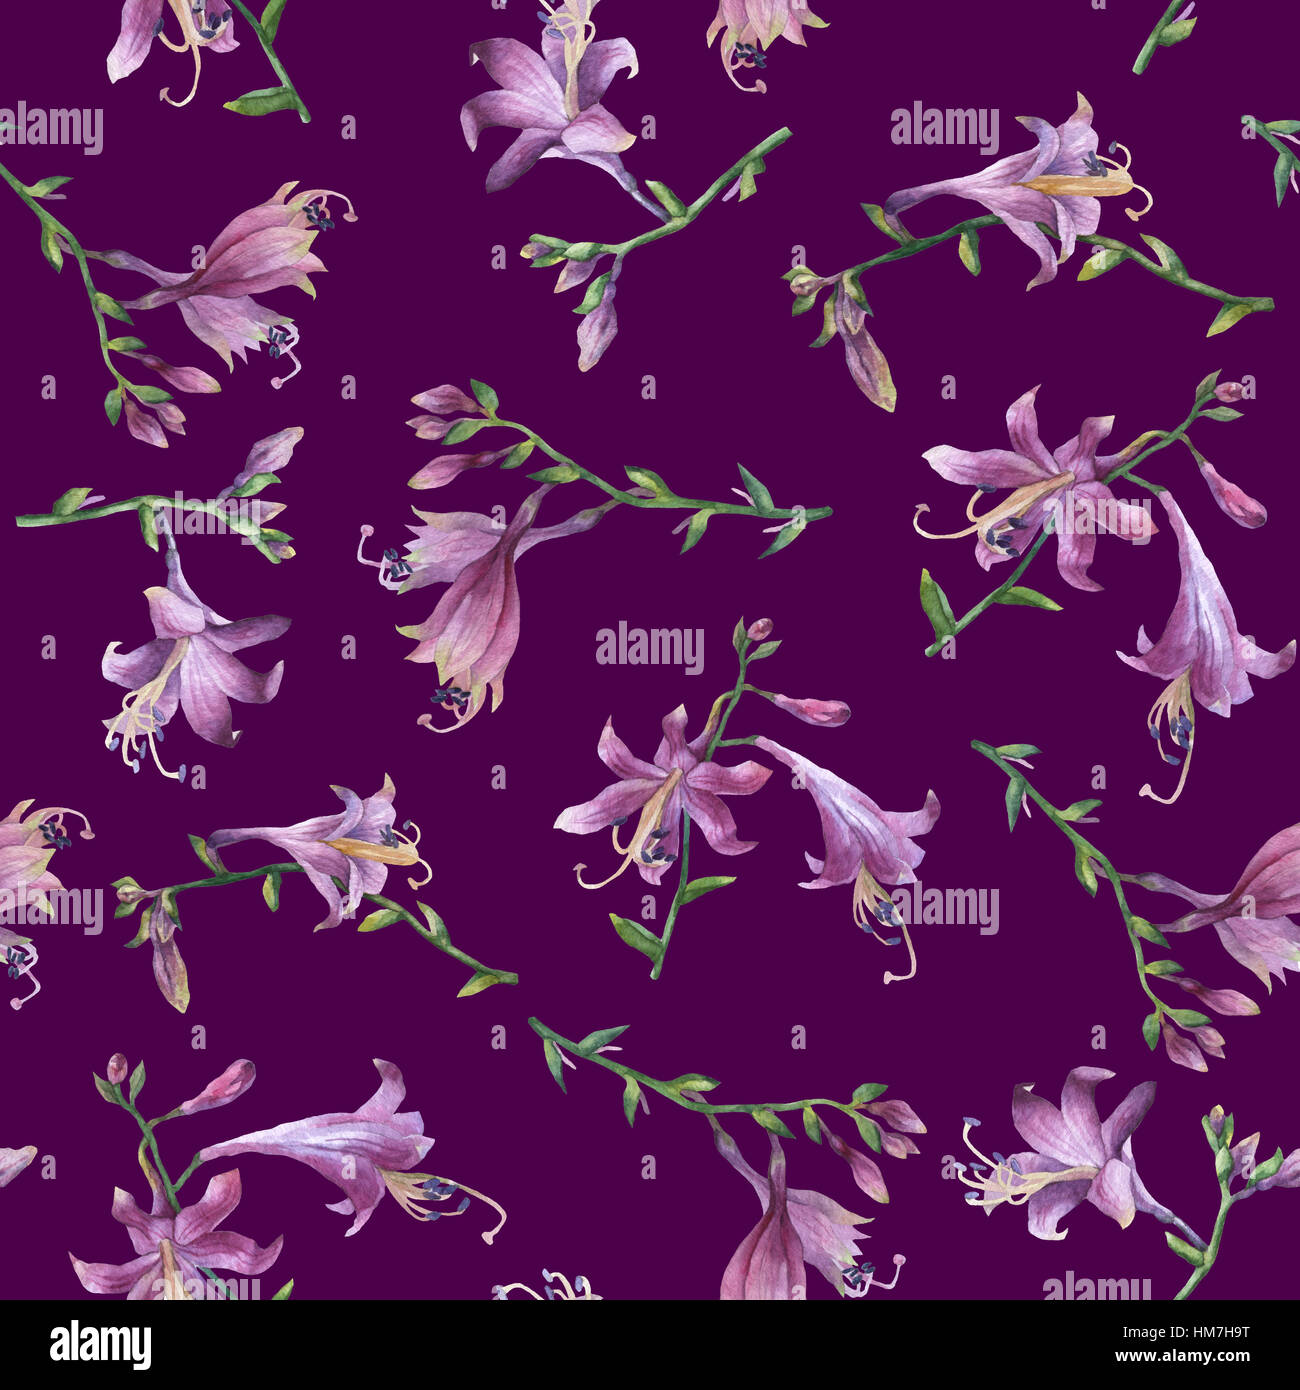 Seamless pattern with branch of purple hosta flower. Lilies. Hosta ventricosa minor. Hand drawn watercolor painting on purple background. Stock Photo